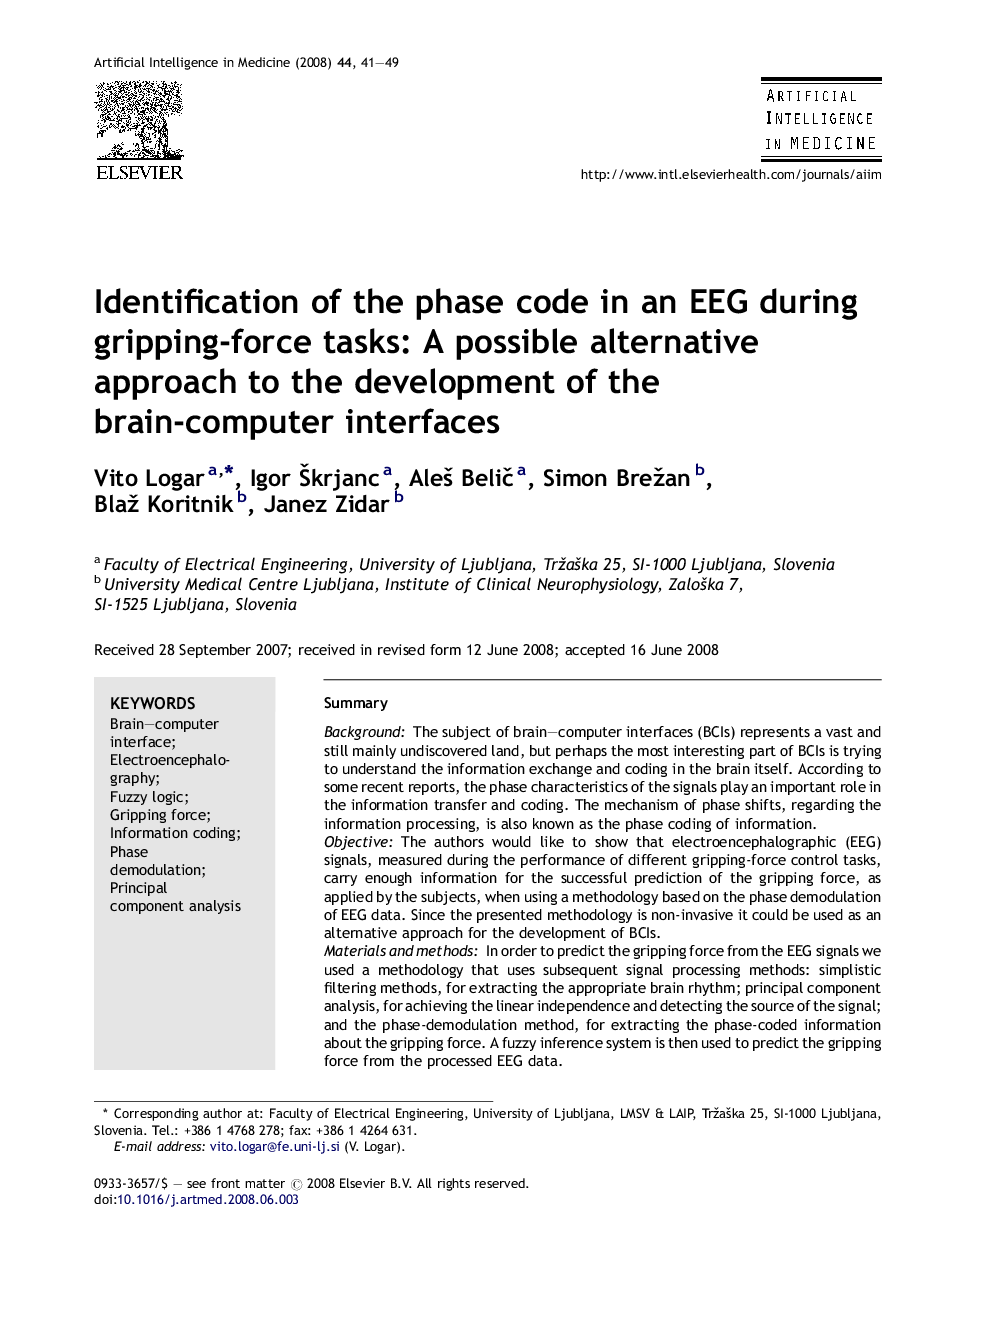 Identification of the phase code in an EEG during gripping-force tasks: A possible alternative approach to the development of the brain-computer interfaces